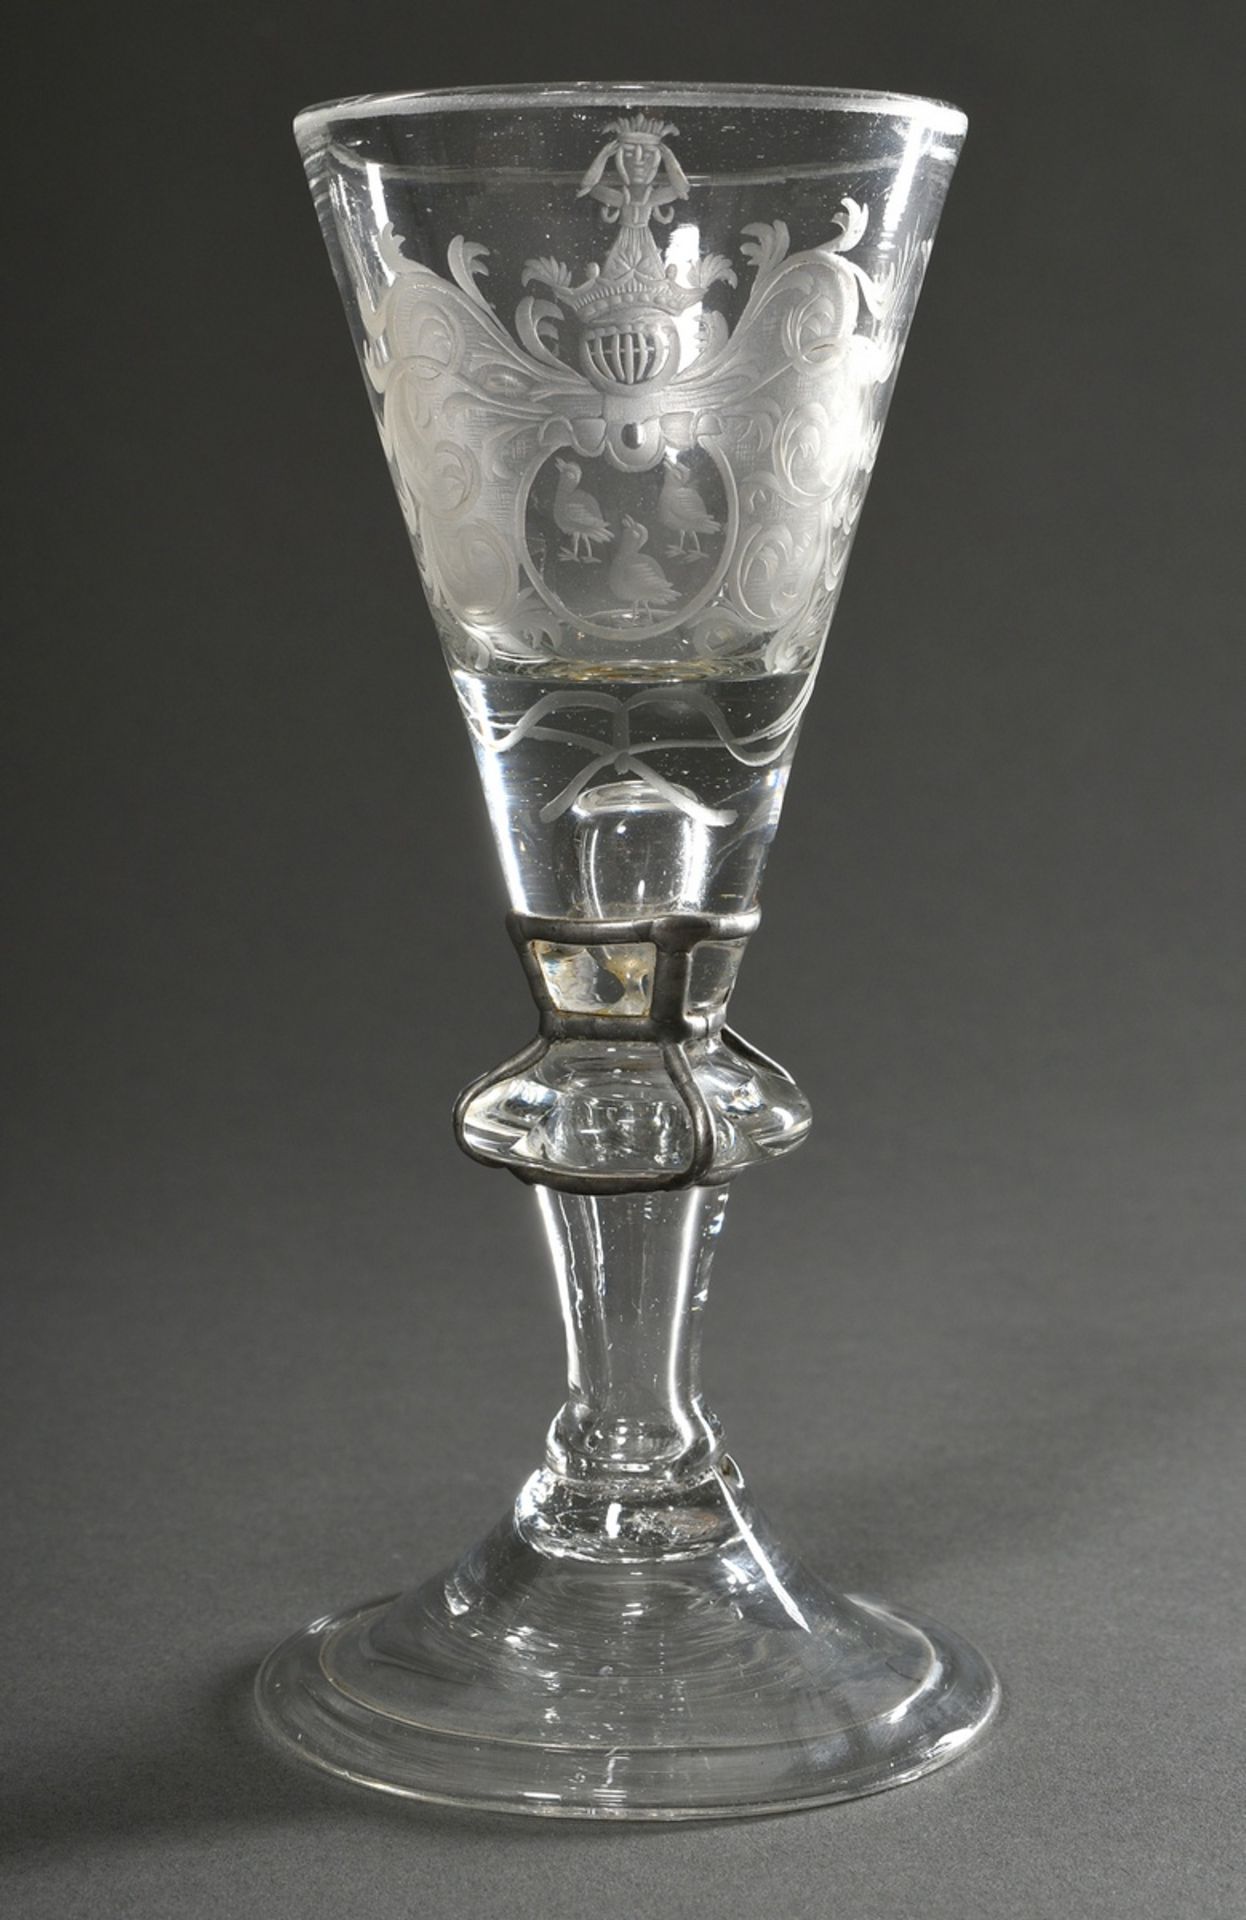 Baroque goblet glass with cut coat of arms "Three quails under a crest with figural crowning", 18th